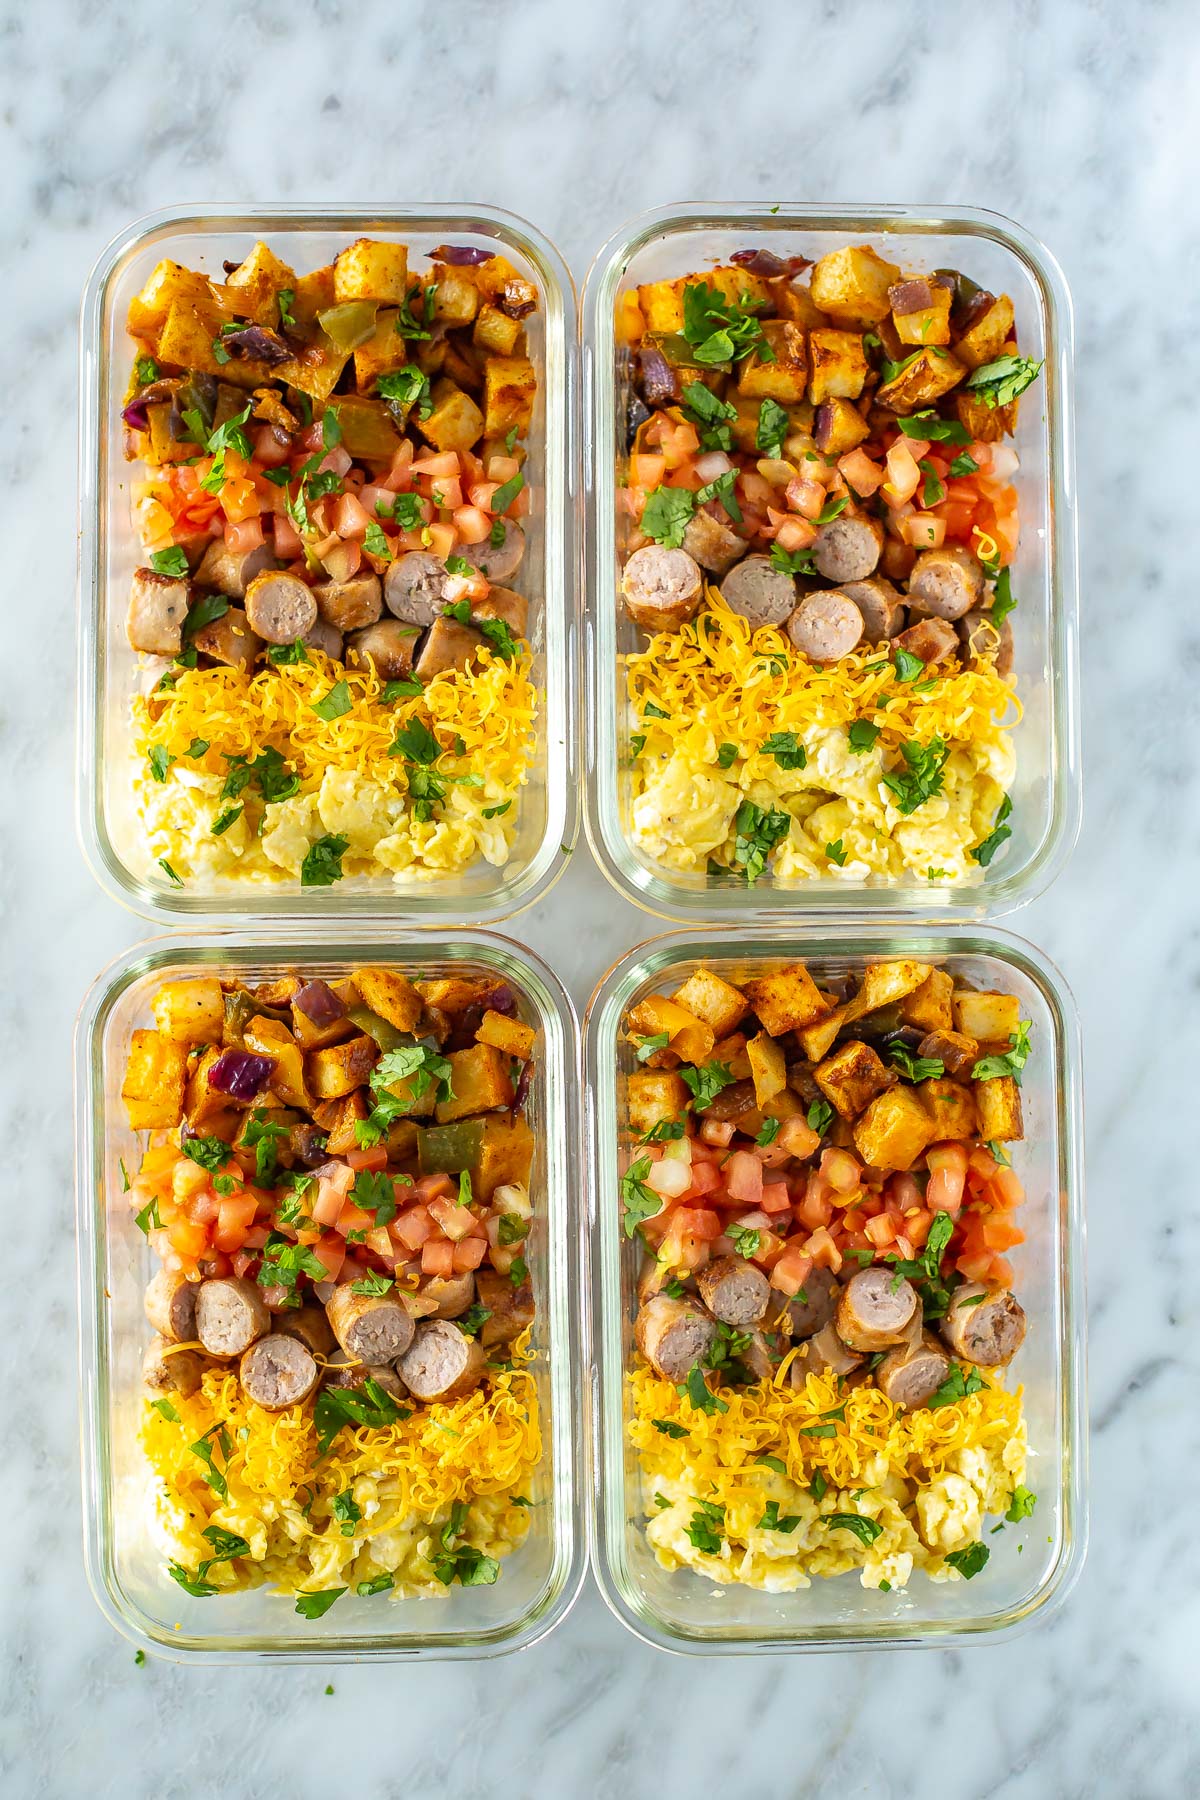 Four meal prep containers filled with roasted veggies, scrambled eggs, and cooked sausage.